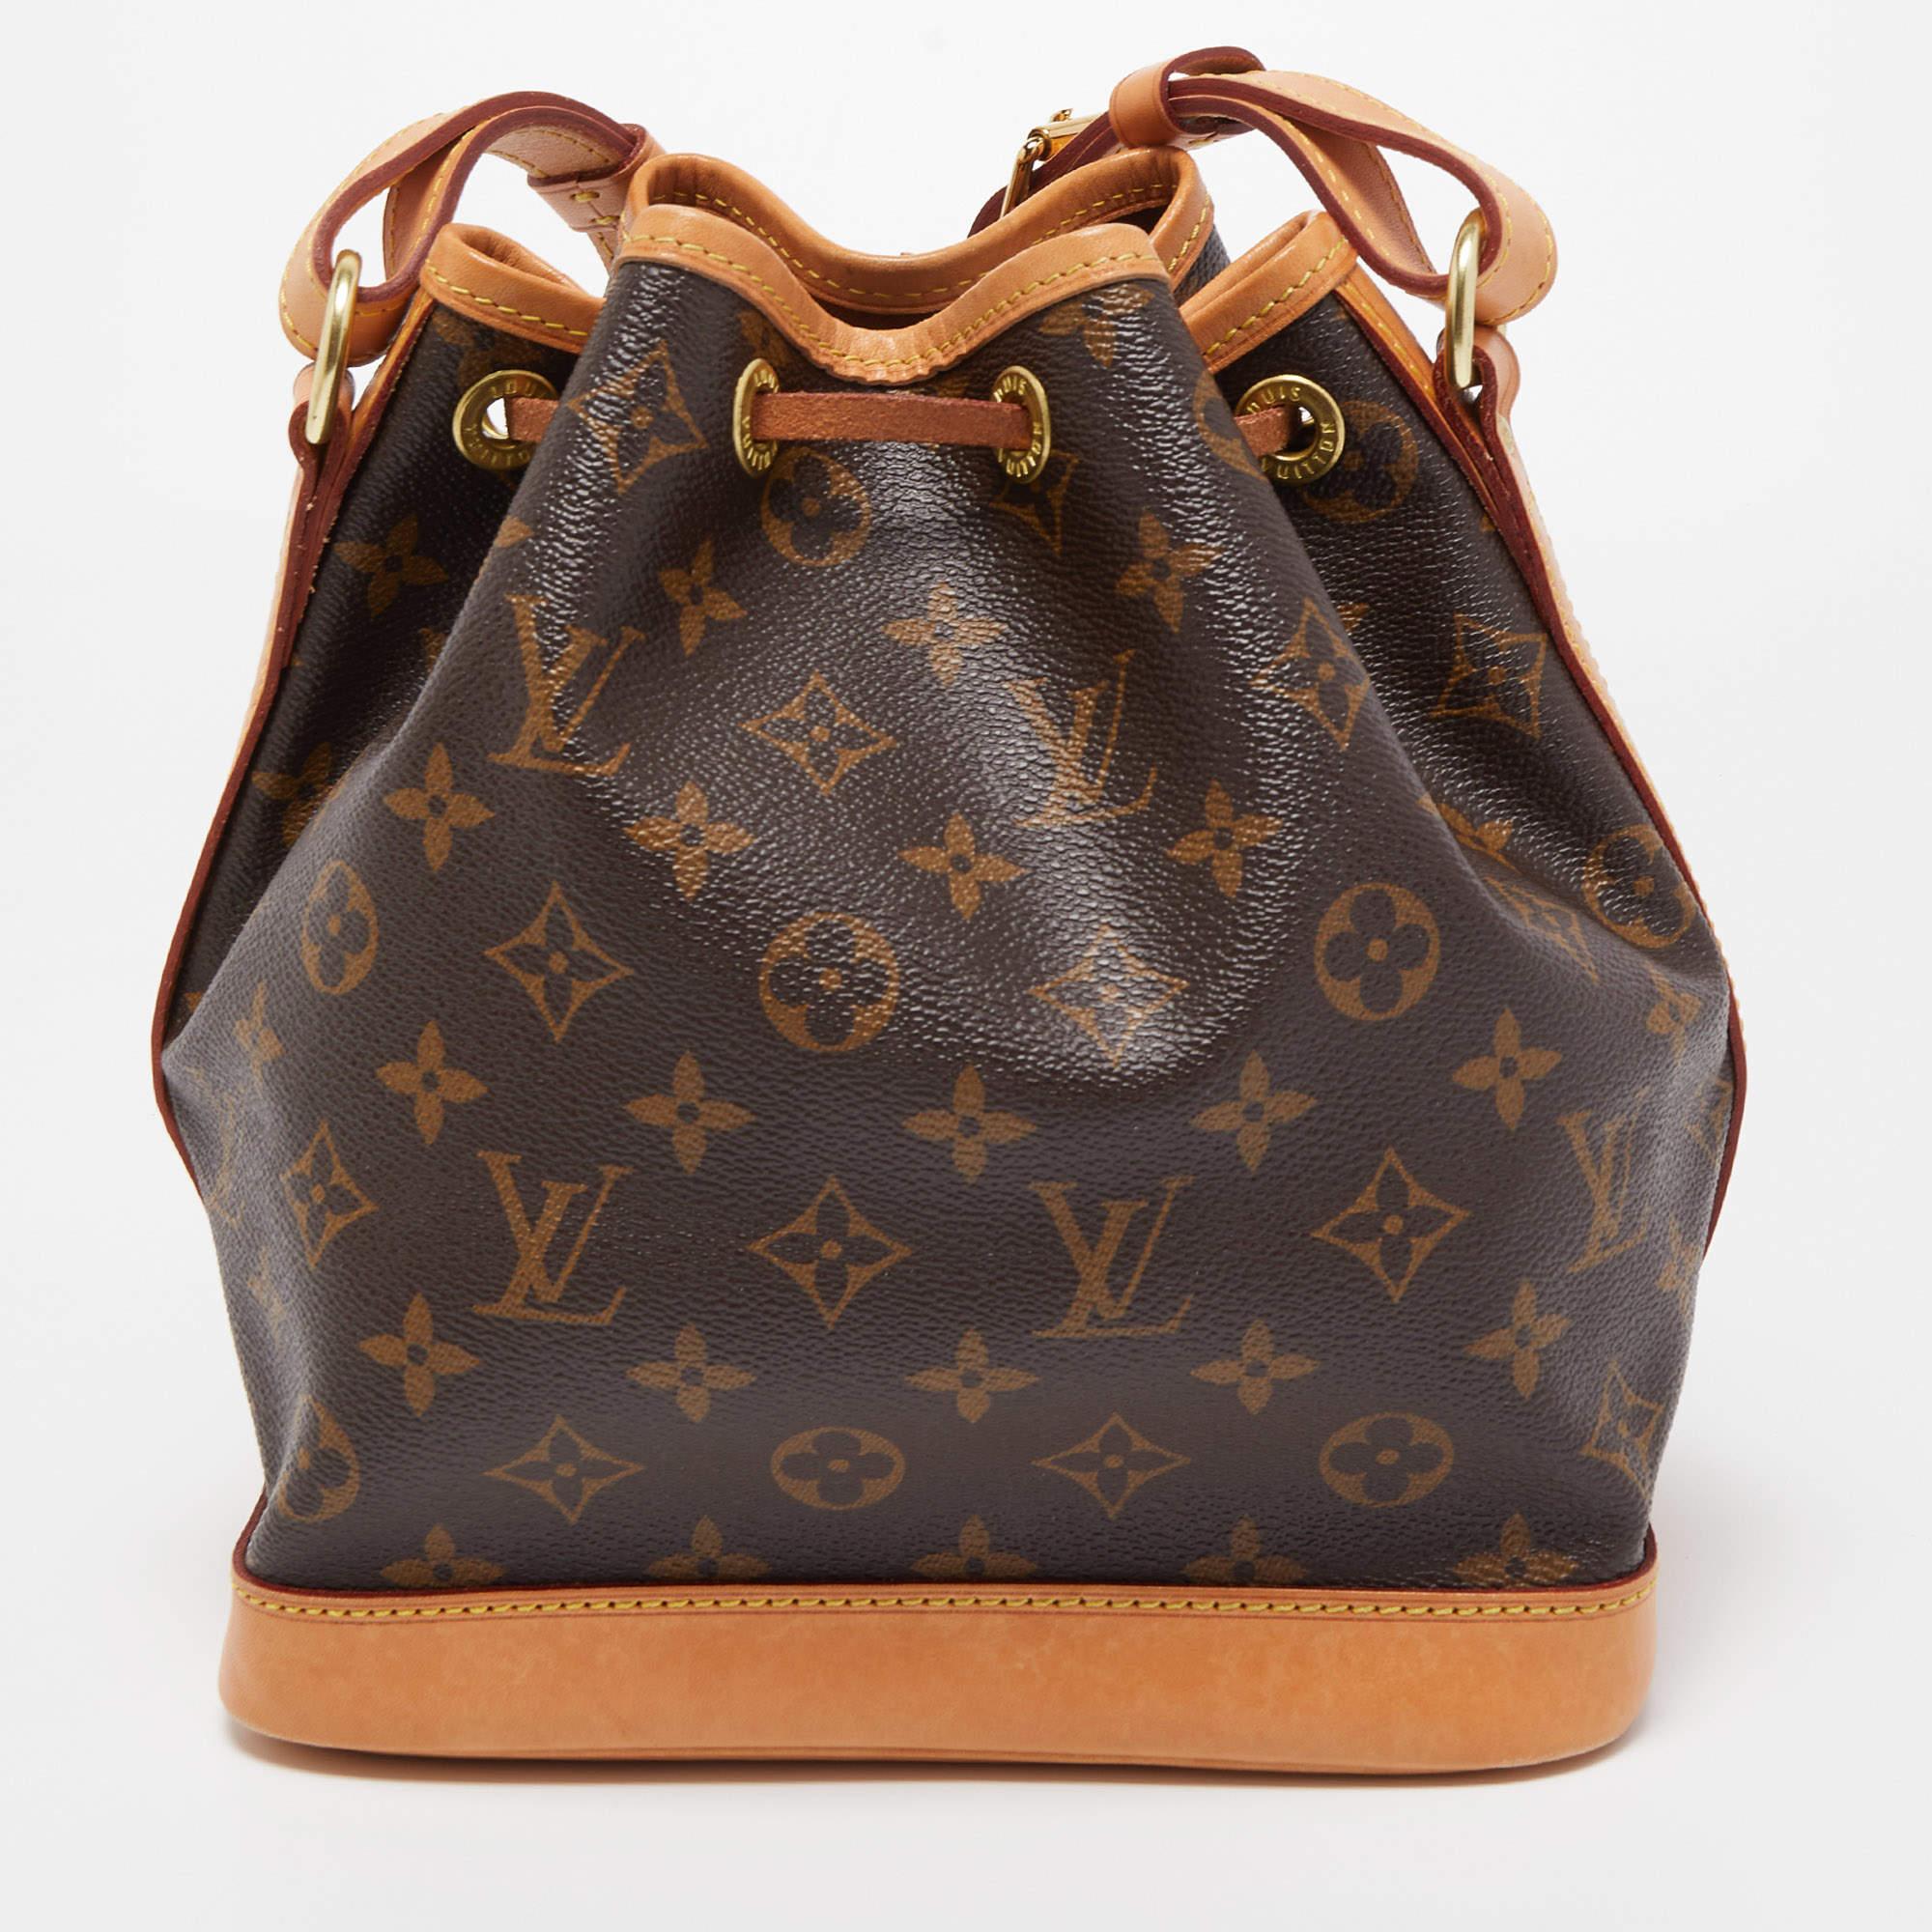 Made in 1932 by Louis Vuitton to carry bottles of champagne, the iconic Noe now serves as a stylish handbag. Crafted from Monogram canvas and leather, the Noe BB exudes just the right amount of sophistication. It has a single shoulder strap and a